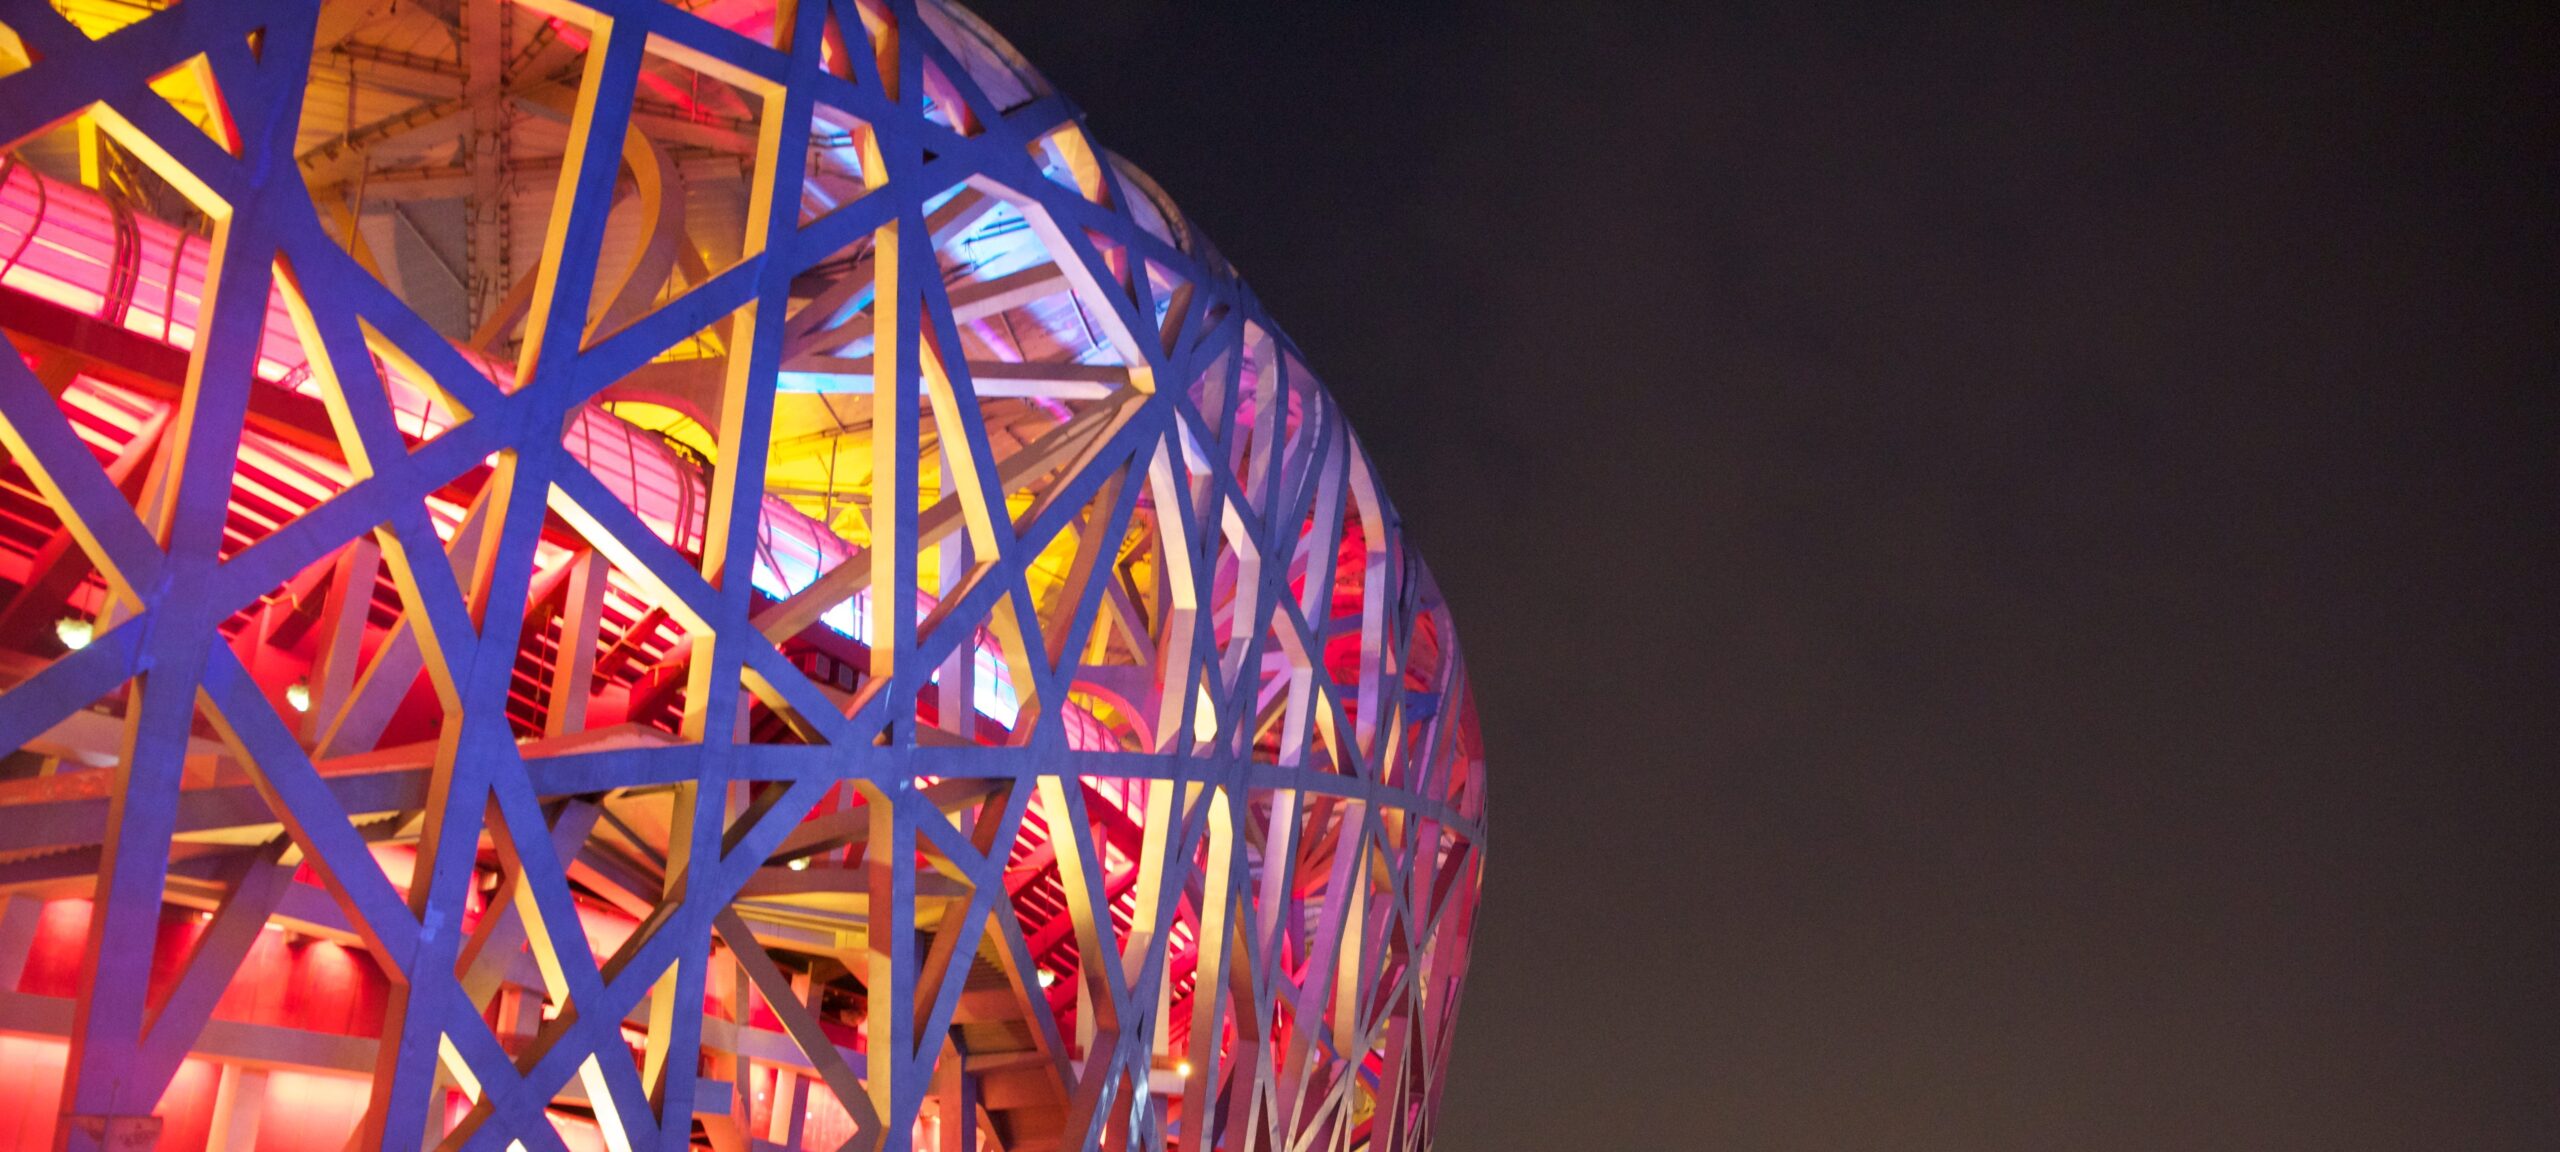 Photo of Beijing Olympic site, featuring metalwork in the shape of a web, with pink, orange, and yellow lights.